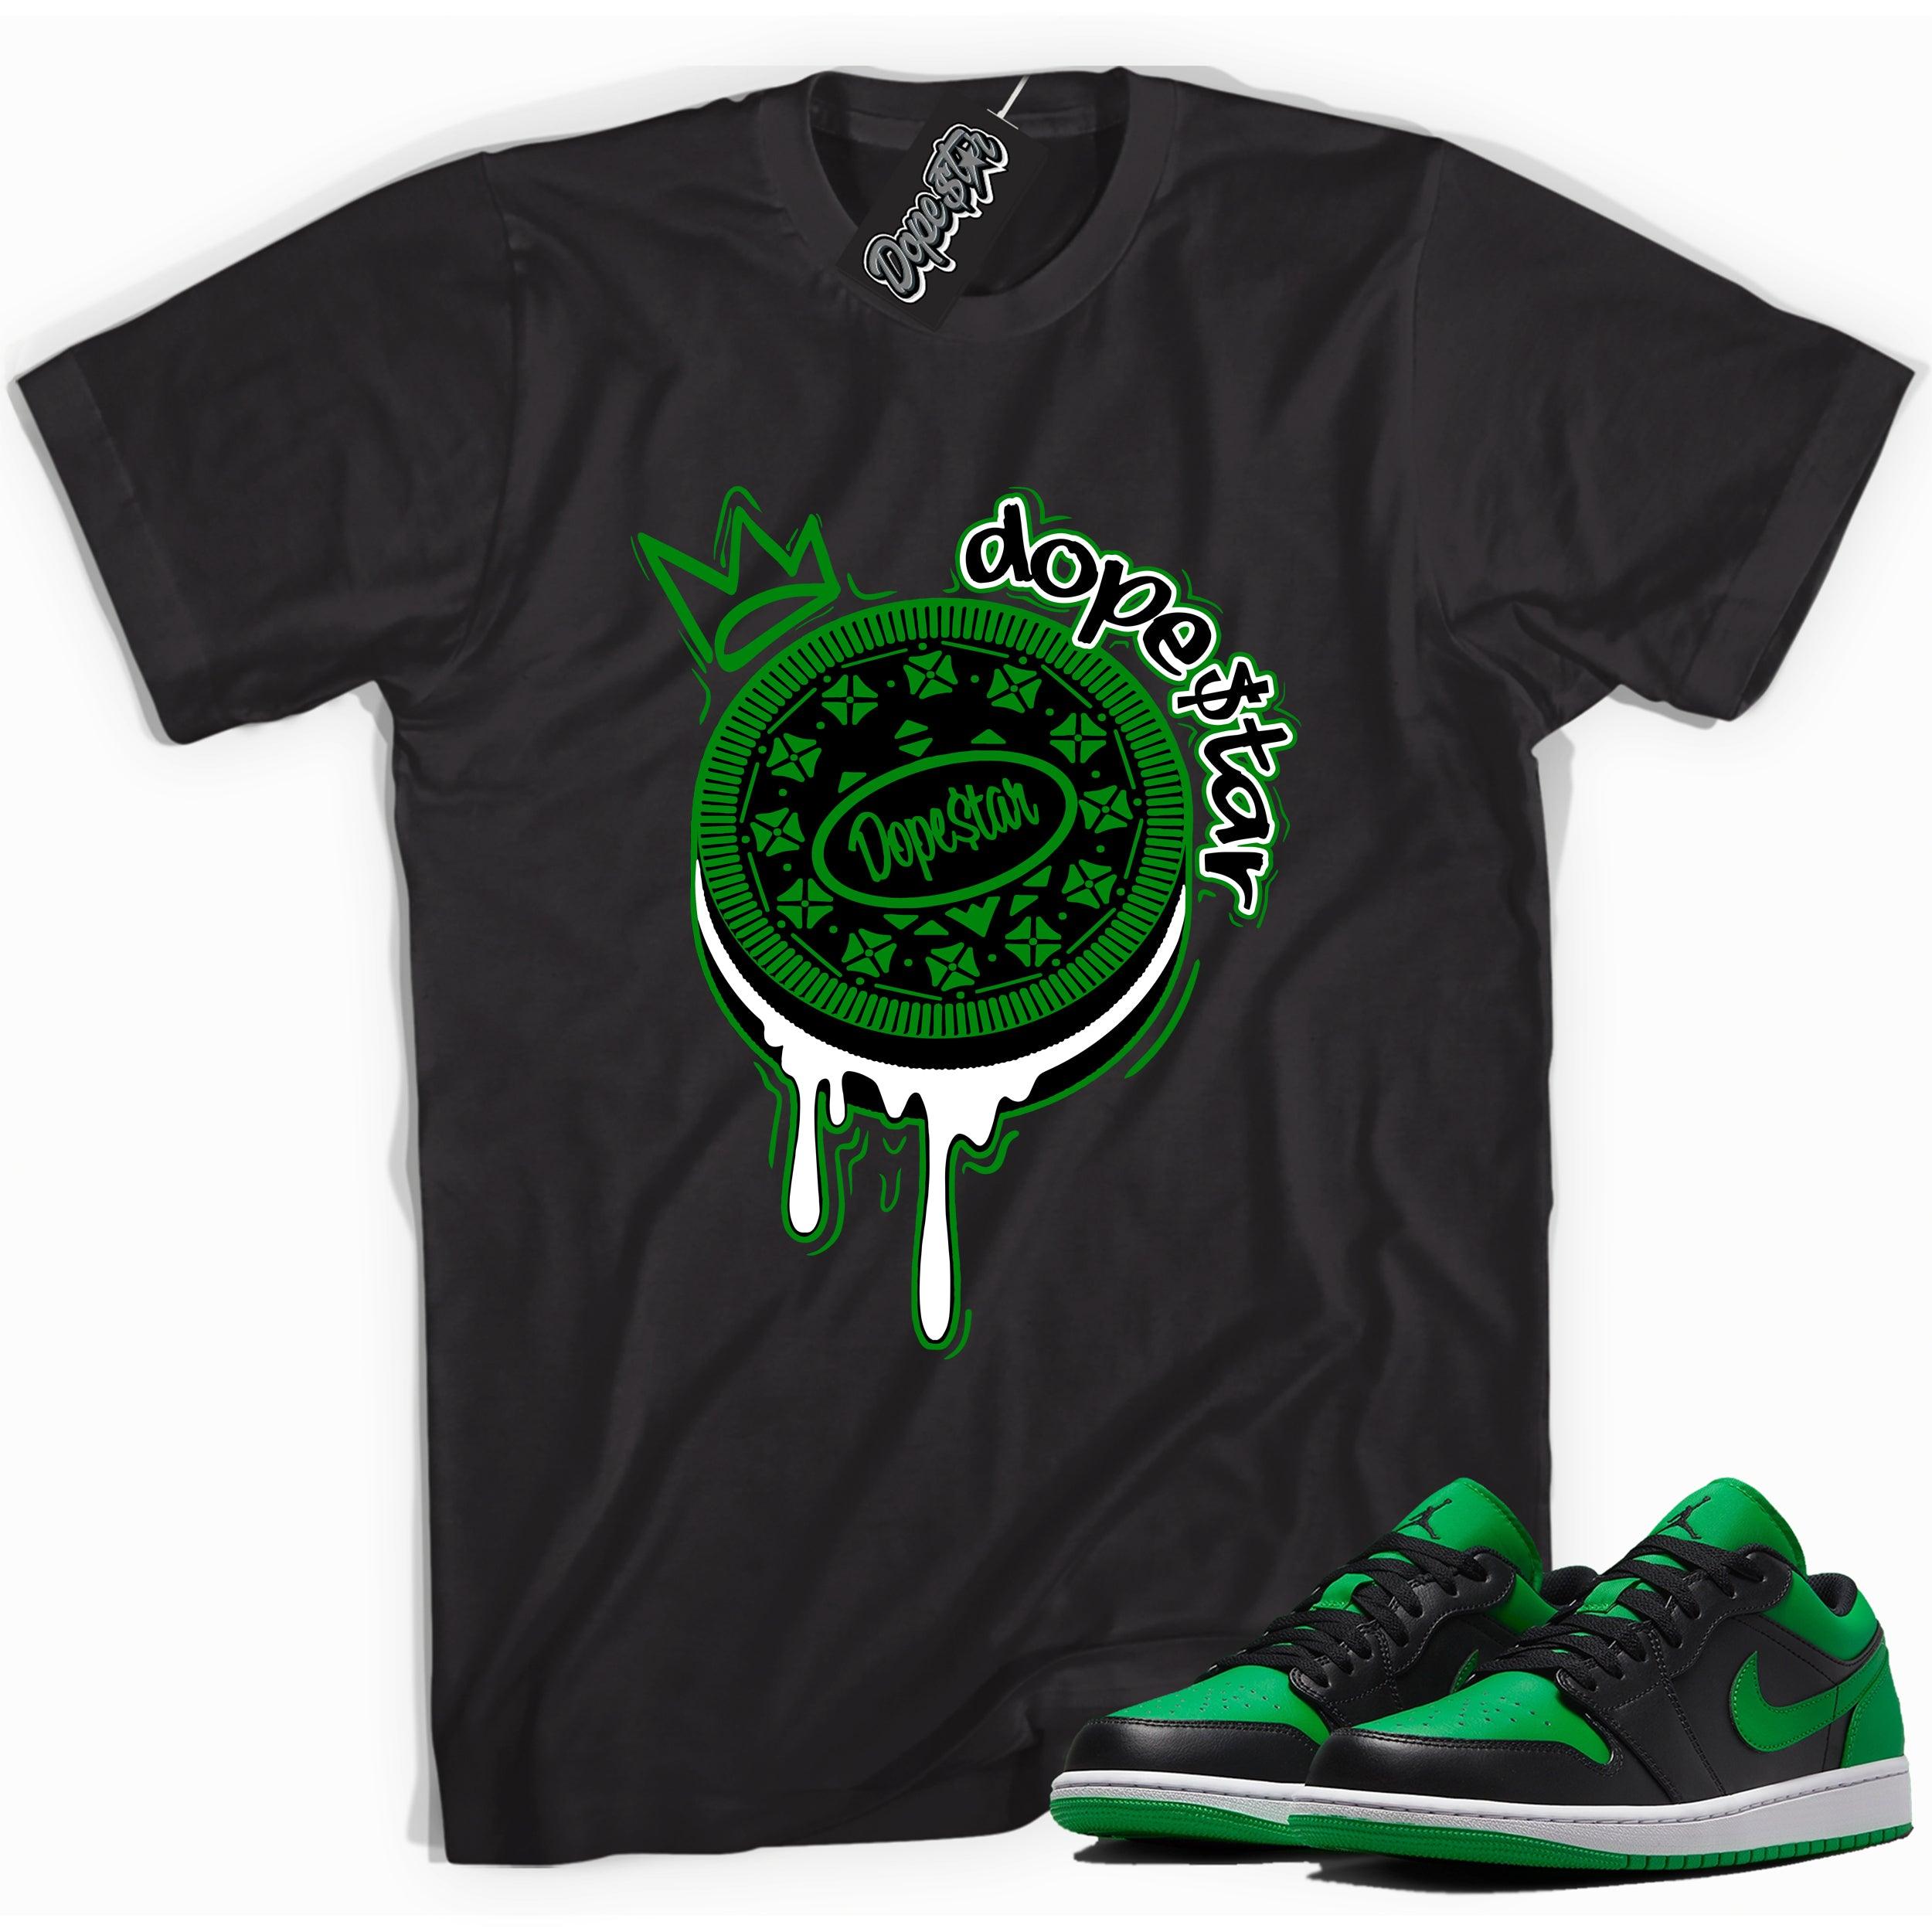 Cool black graphic tee with 'Dope $tar Oreo' print, that perfectly matches Air Jordan 1 Low Lucky Green sneakers